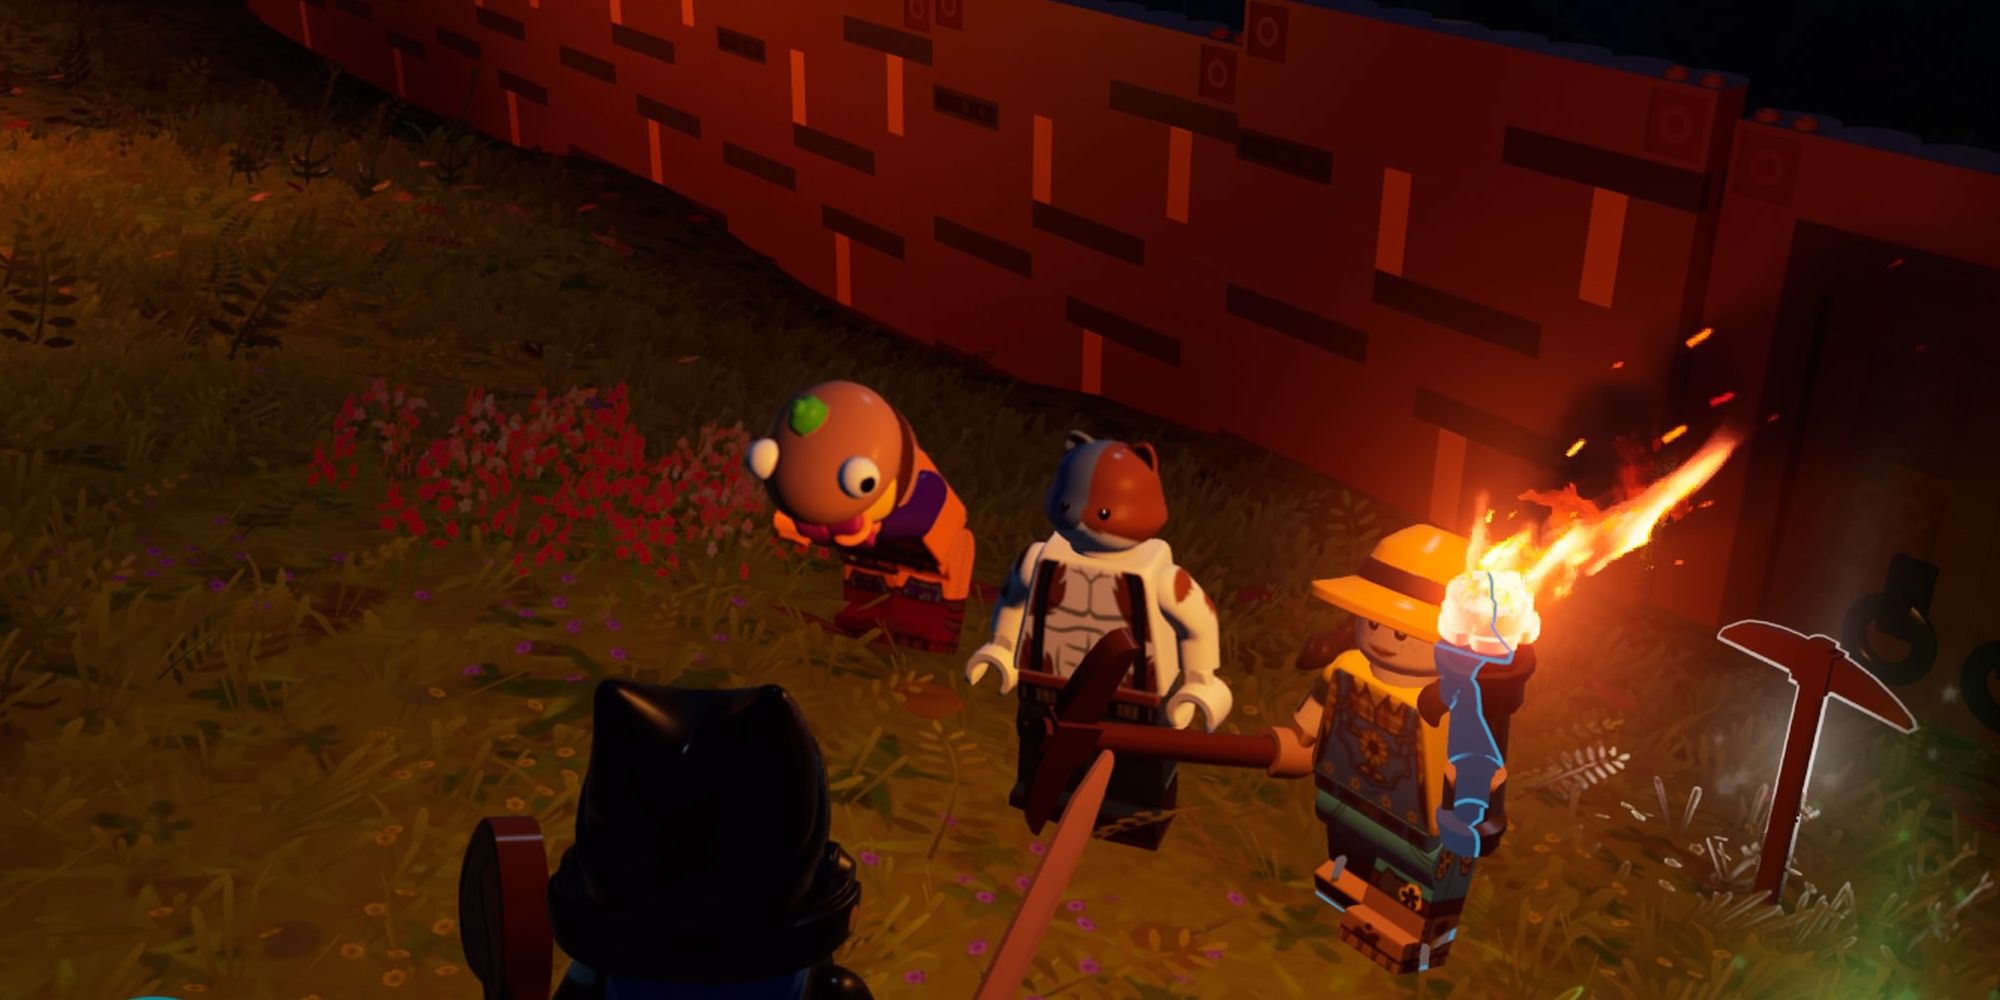 How to invite an NPC to live in a village in Fortnite Lego